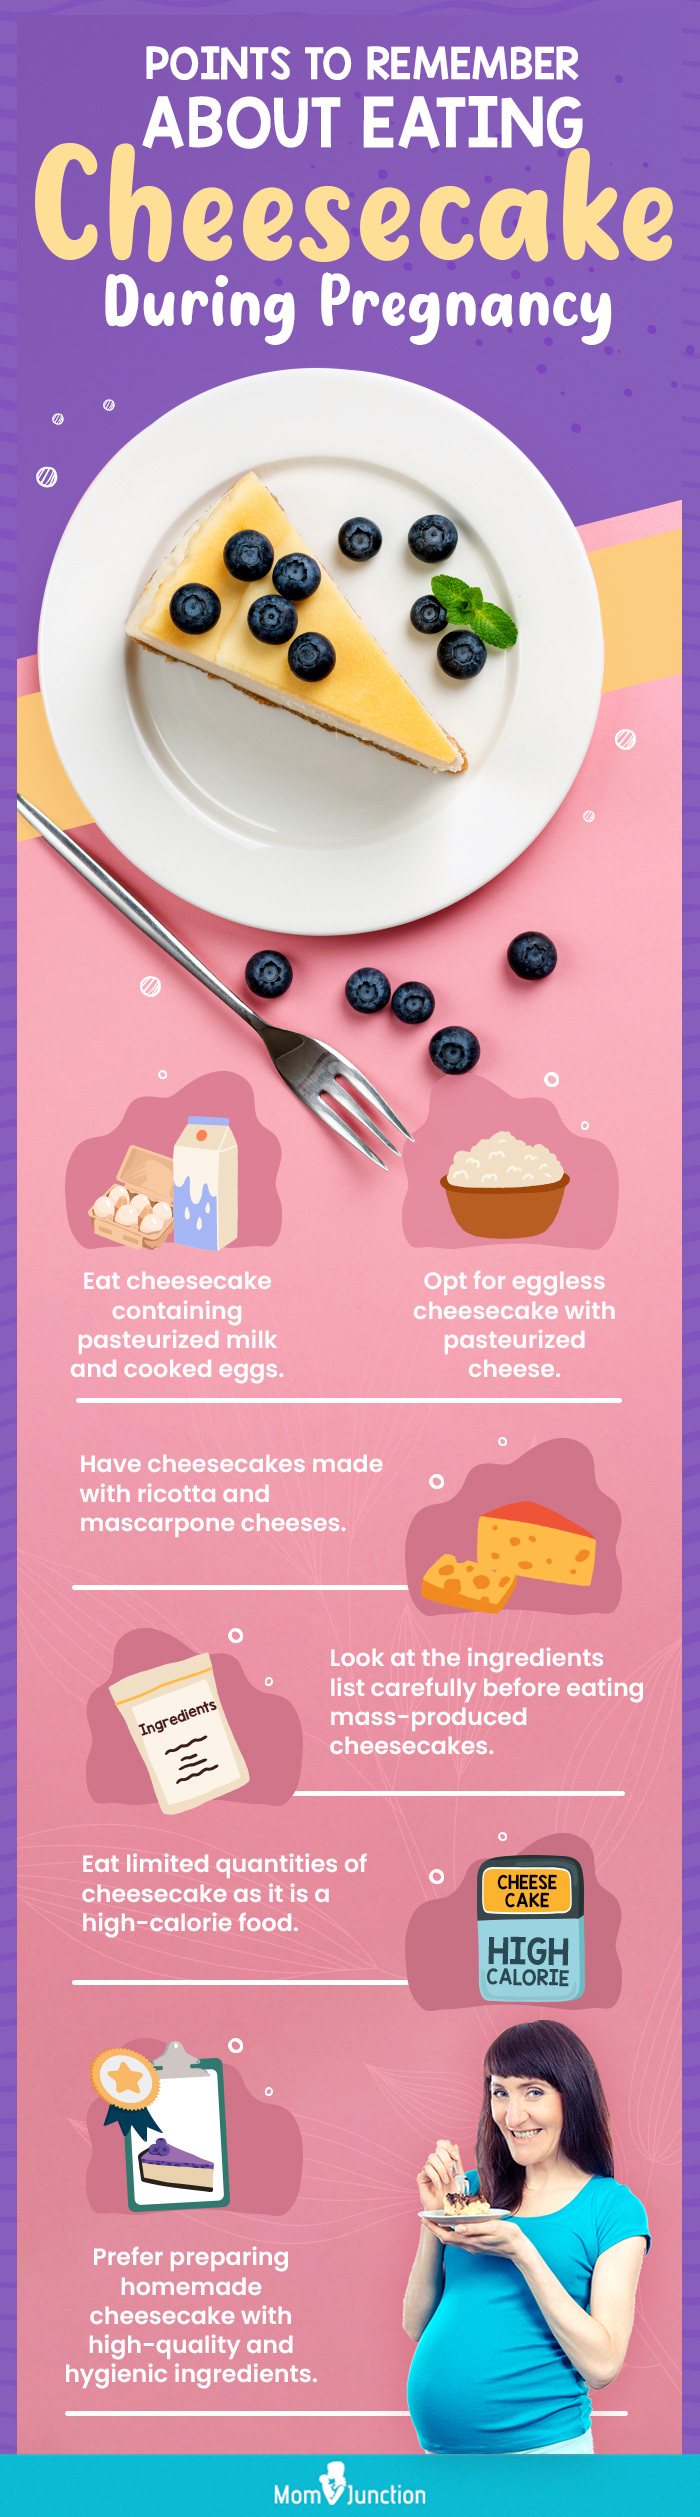 points to remember about eating cheesecake during pregnancy (infographic)